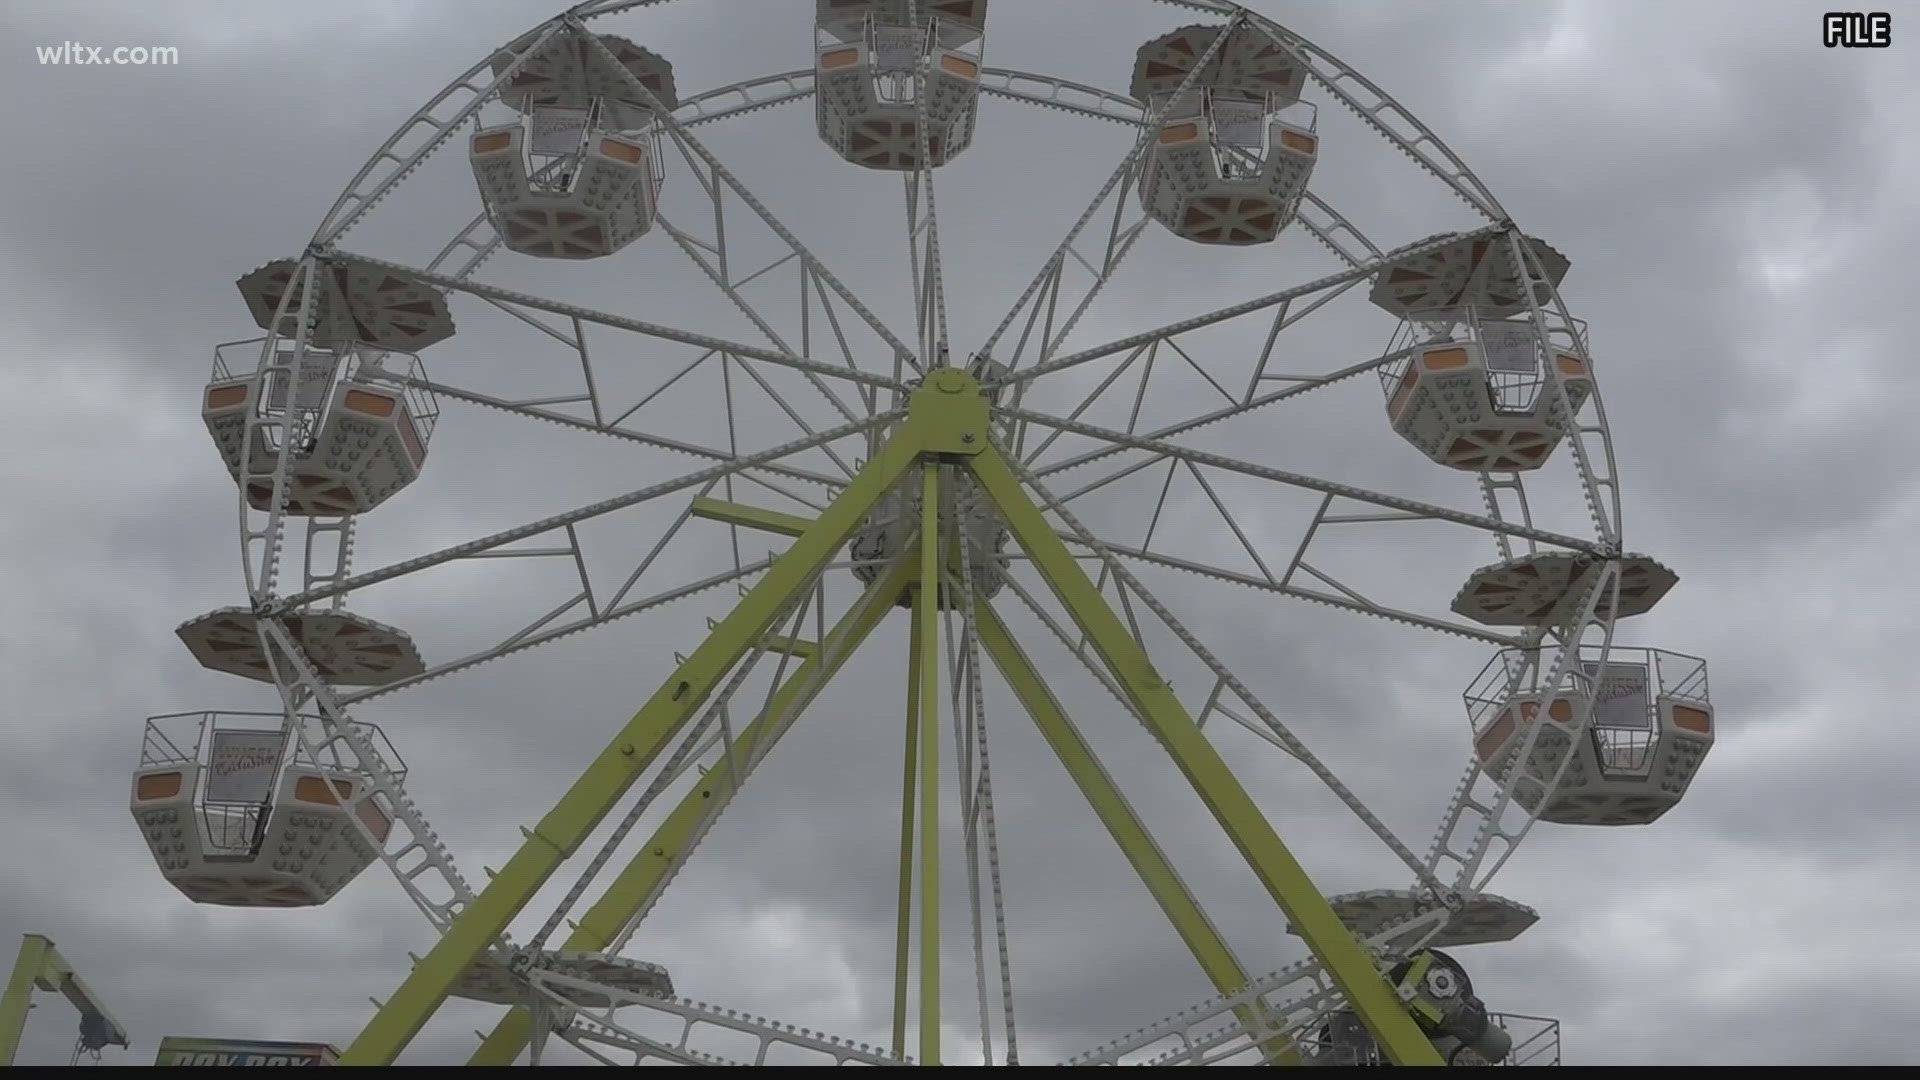 There are new security measures in place for the Orangeburg County Fair this year.